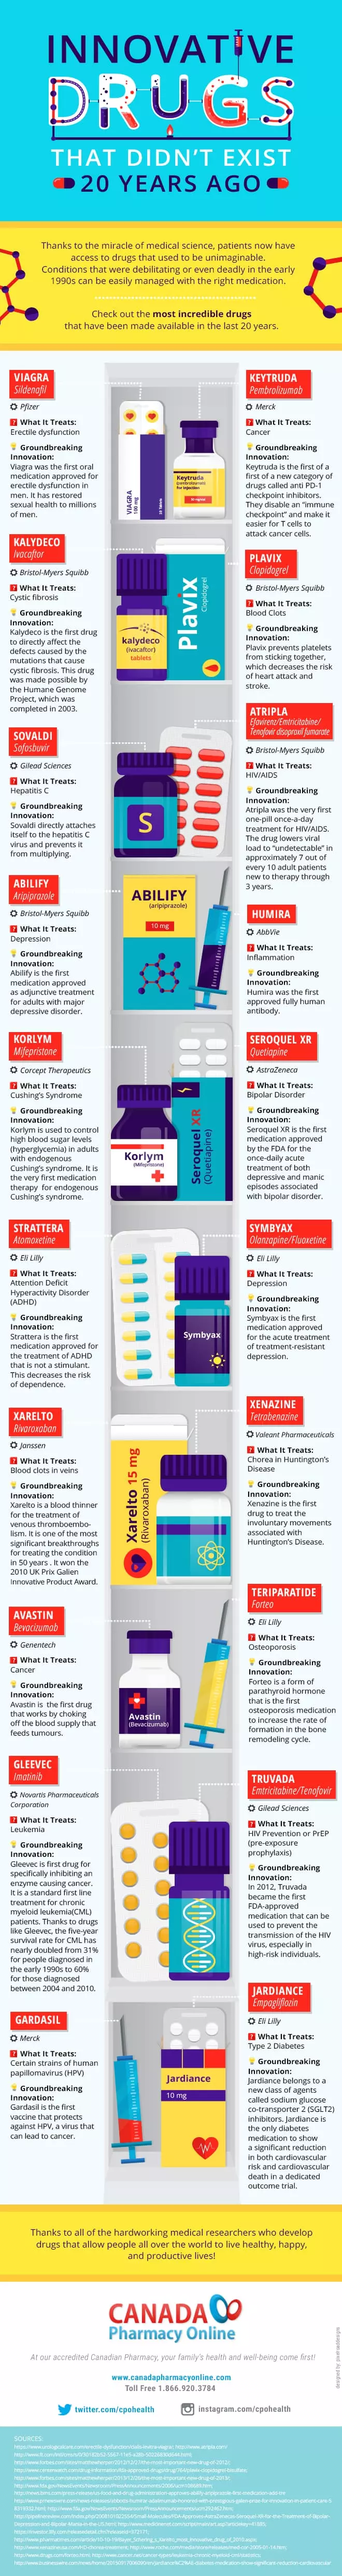 Innovative Drugs that Didn't Exist 20 Years Ago